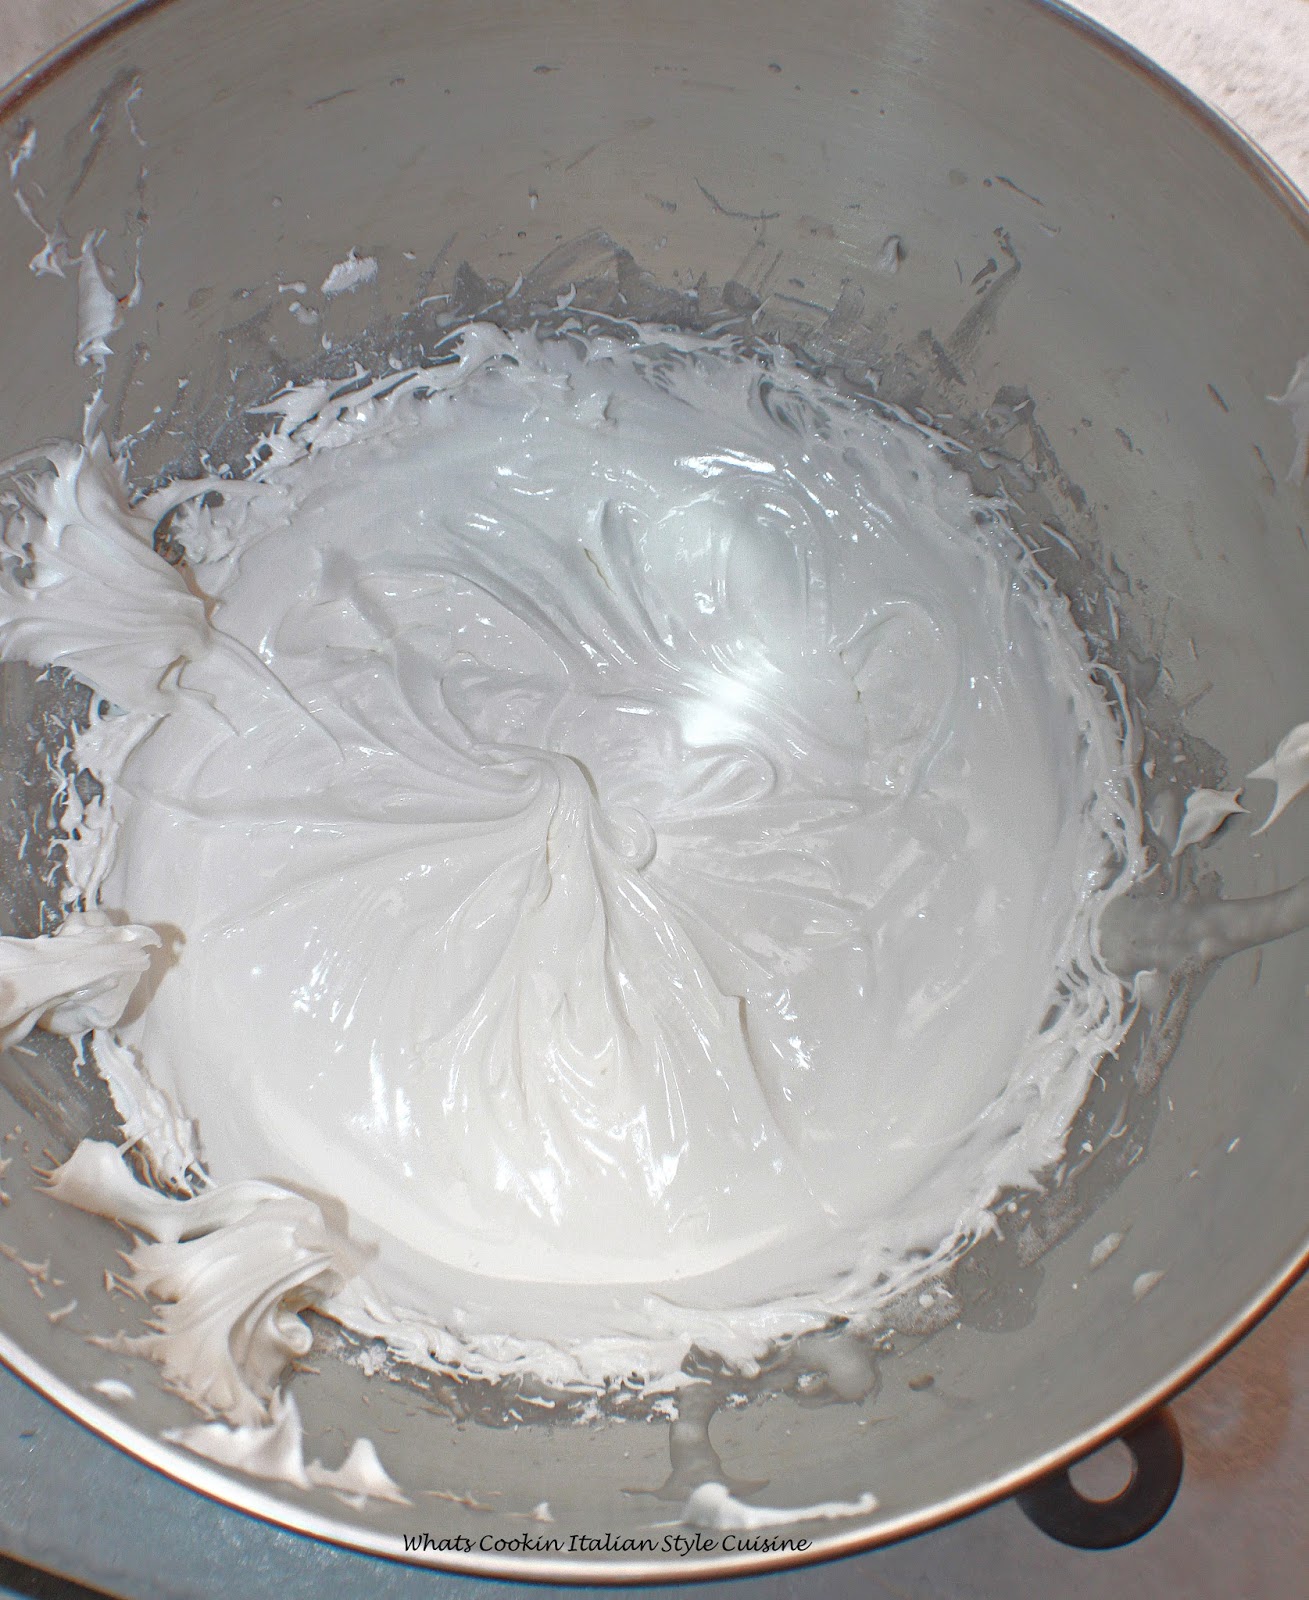 easy meringue frosting that gets hard in an instant to make fun cake toppings and characters